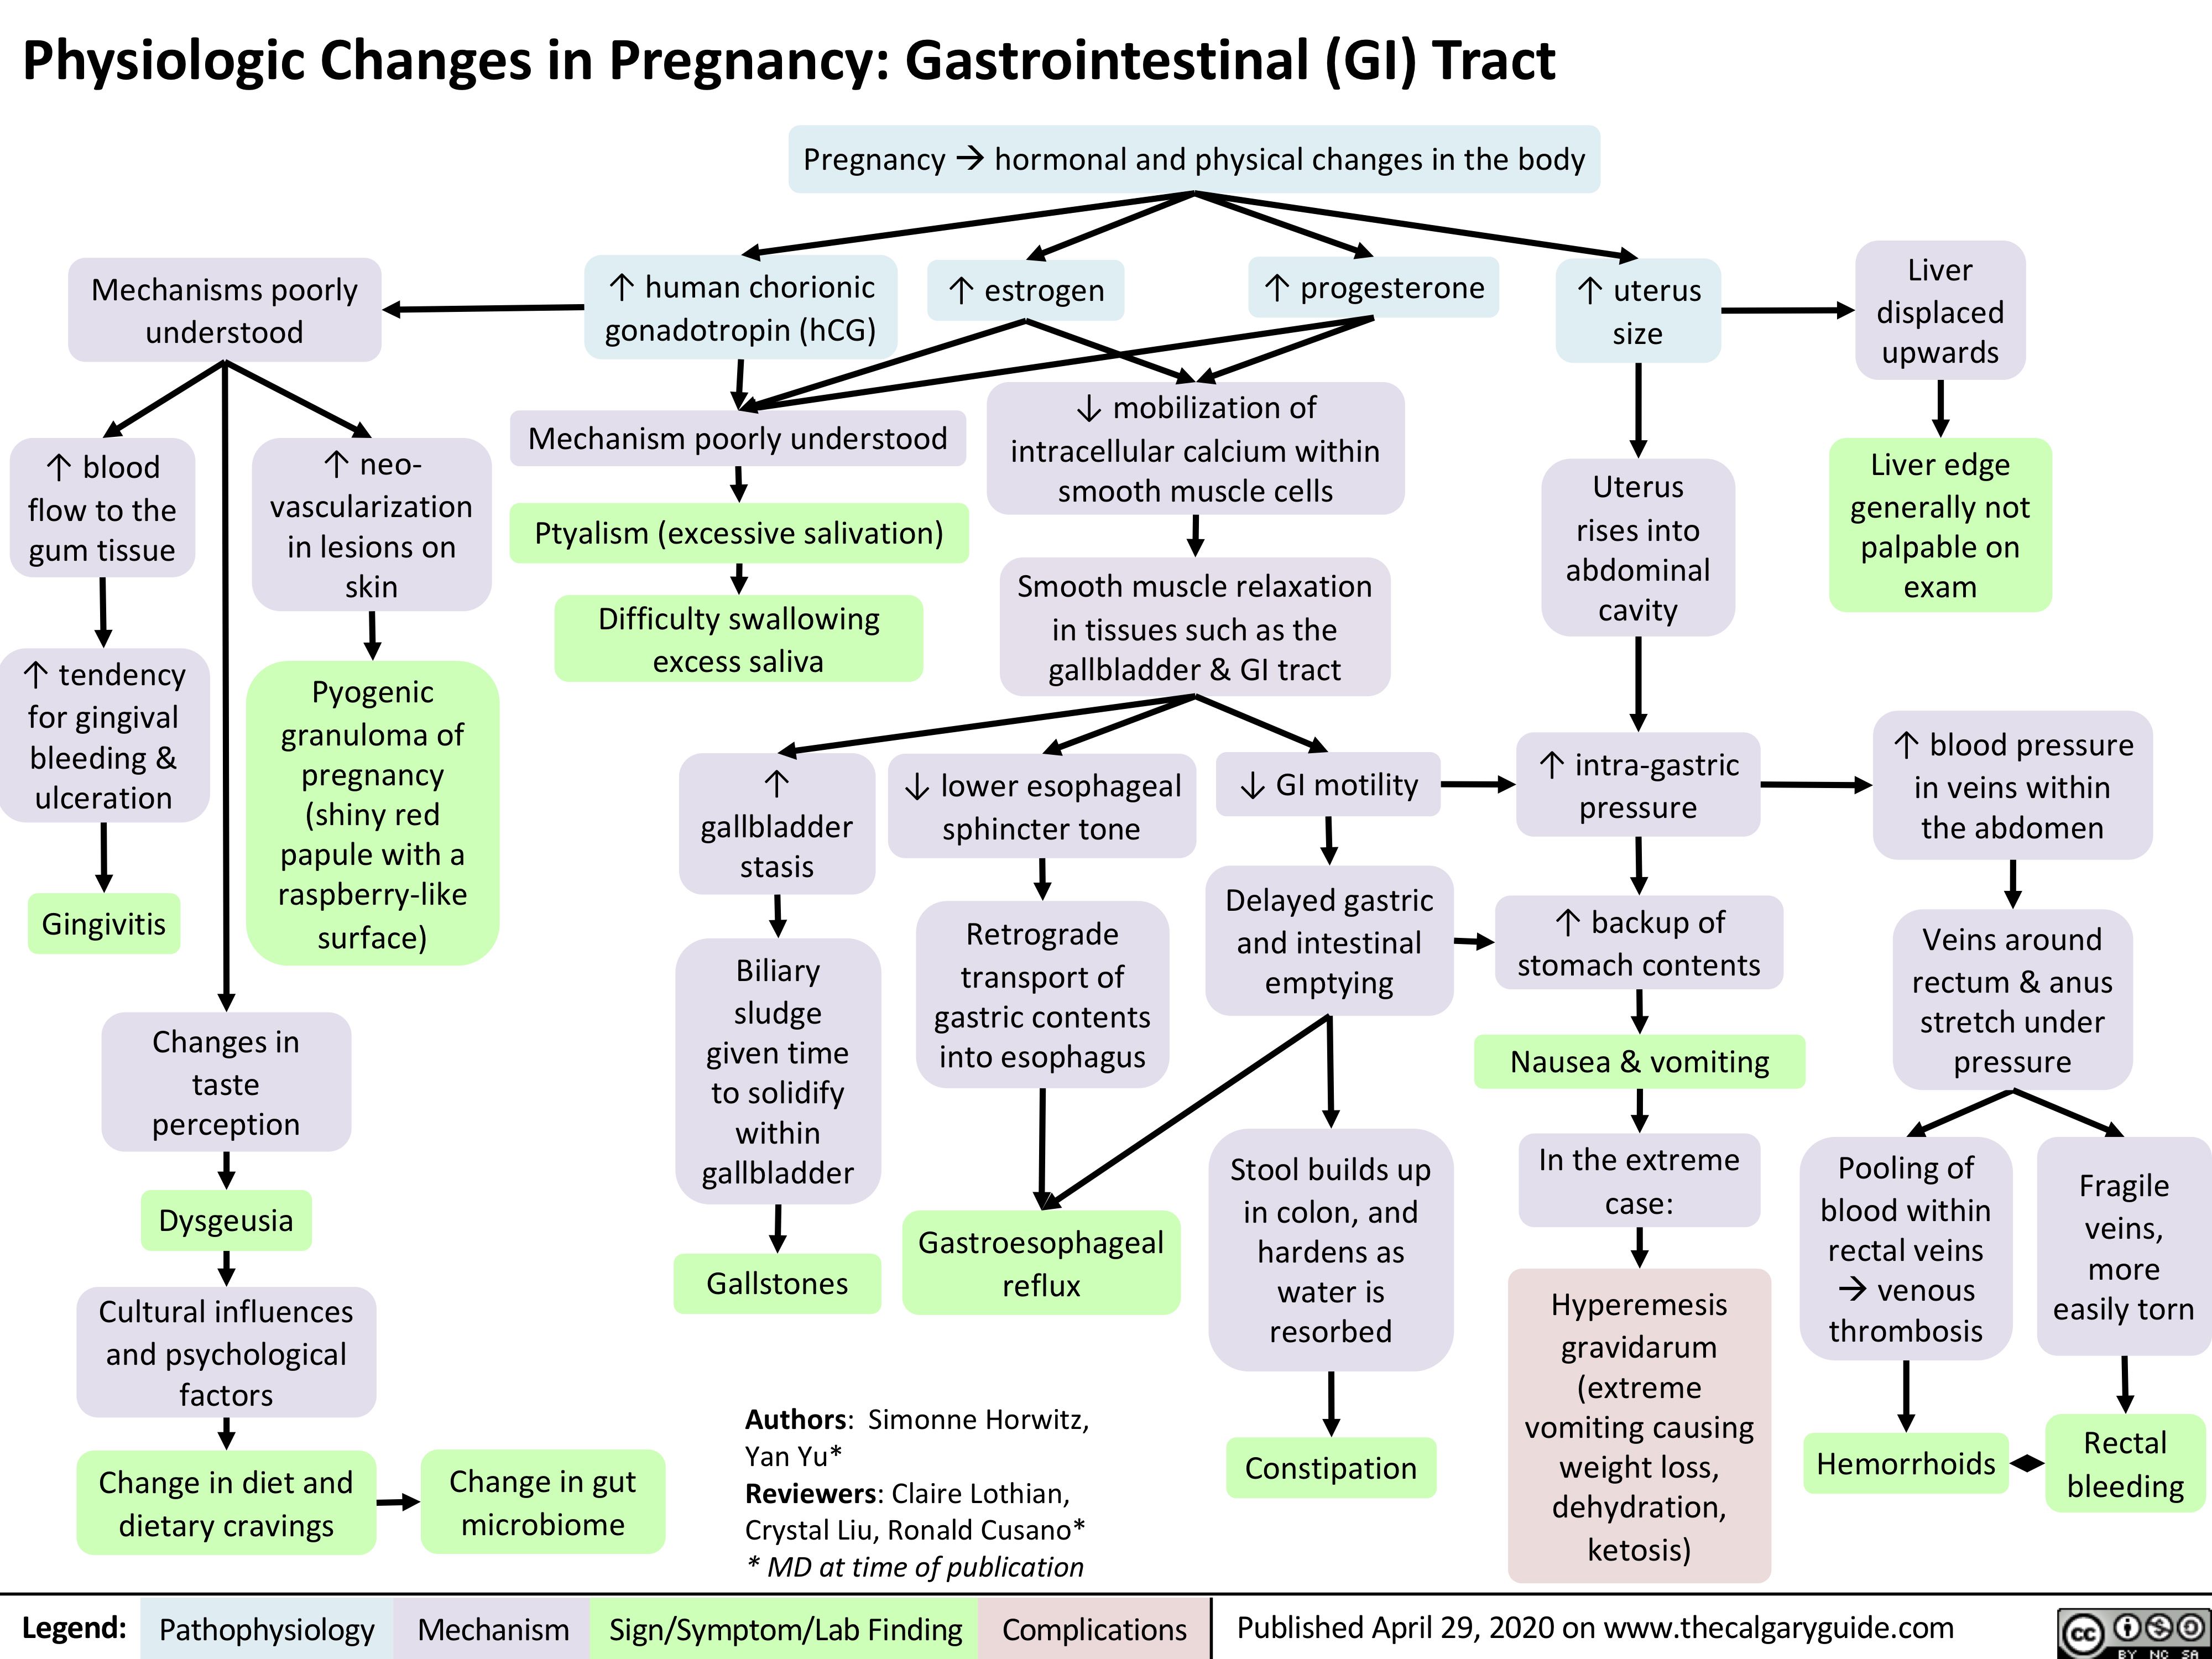 Physiologic Changes in Pregnancy: Gastrointestinal (GI) Tract
 Pregnancyàhormonal and physical changes in the body
         Mechanisms poorly understood
↑ human chorionic ↑ estrogen ↑ progesterone gonadotropin (hCG)
↑ uterus size
Uterus rises into
abdominal cavity
↑ intra-gastric pressure
↑ backup of stomach contents
Nausea & vomiting
In the extreme case:
Hyperemesis gravidarum (extreme vomiting causing weight loss, dehydration, ketosis)
Liver displaced upwards
Liver edge generally not palpable on exam
↑ blood pressure in veins within the abdomen
Veins around rectum & anus stretch under pressure
                ↑ blood flow to the gum tissue
↑ tendency for gingival bleeding & ulceration
Gingivitis
↑ neo- vascularization in lesions on skin
Pyogenic granuloma of pregnancy (shiny red papule with a raspberry-like surface)
Mechanism poorly understood
Ptyalism (excessive salivation)
Difficulty swallowing excess saliva
↑ gallbladder stasis
Biliary
sludge given time to solidify within gallbladder
Gallstones
↓ mobilization of intracellular calcium within smooth muscle cells
Smooth muscle relaxation in tissues such as the gallbladder & GI tract
                                      Changes in taste perception
Dysgeusia
Cultural influences and psychological factors
Change in diet and dietary cravings
↓ lower esophageal sphincter tone
Retrograde transport of gastric contents into esophagus
Gastroesophageal reflux
↓ GI motility
Delayed gastric and intestinal emptying
Stool builds up in colon, and hardens as water is resorbed
Constipation
Pooling of blood within rectal veins àvenous thrombosis
Hemorrhoids
Fragile veins, more easily torn
Rectal bleeding
                           Change in gut microbiome
Authors: Simonne Horwitz, Yan Yu*
Reviewers: Claire Lothian, Crystal Liu, Ronald Cusano* * MD at time of publication
  Legend:
 Pathophysiology
 Mechanism
Sign/Symptom/Lab Finding
  Complications
Published April 29, 2020 on www.thecalgaryguide.com
   